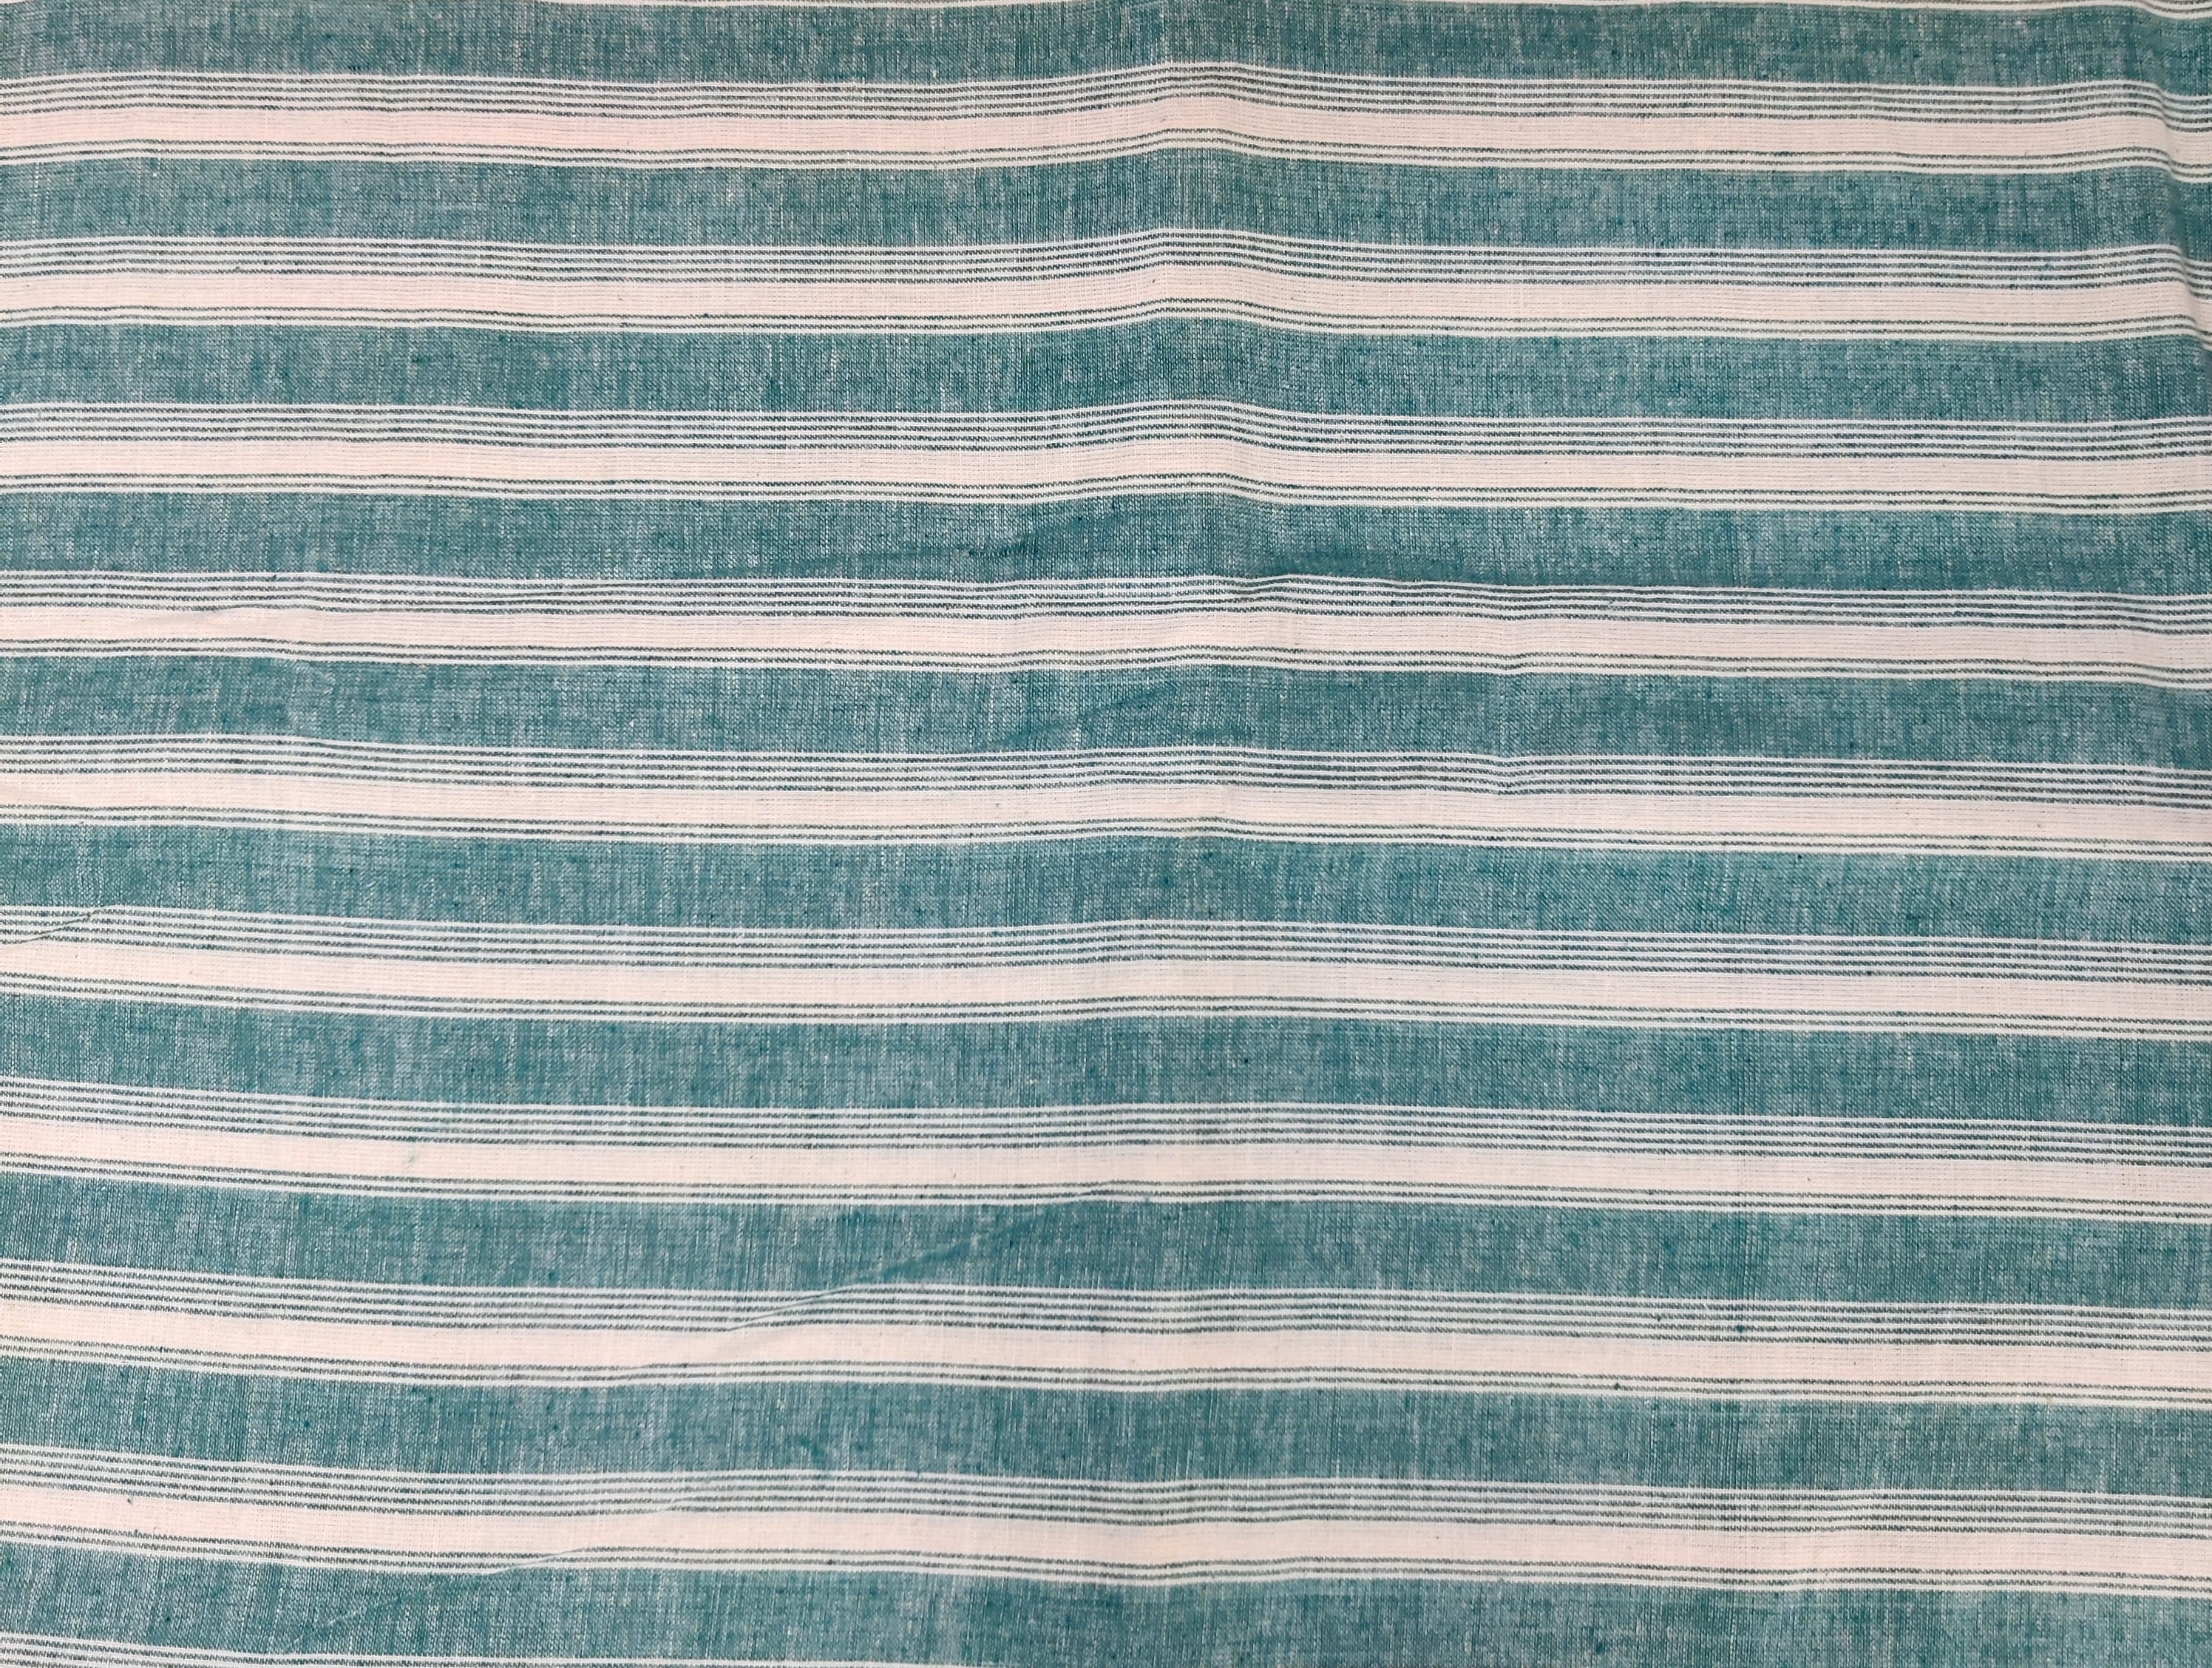 Off White with Turquoise Stripes Kotpad Handloom Fabric - IndianVillèz